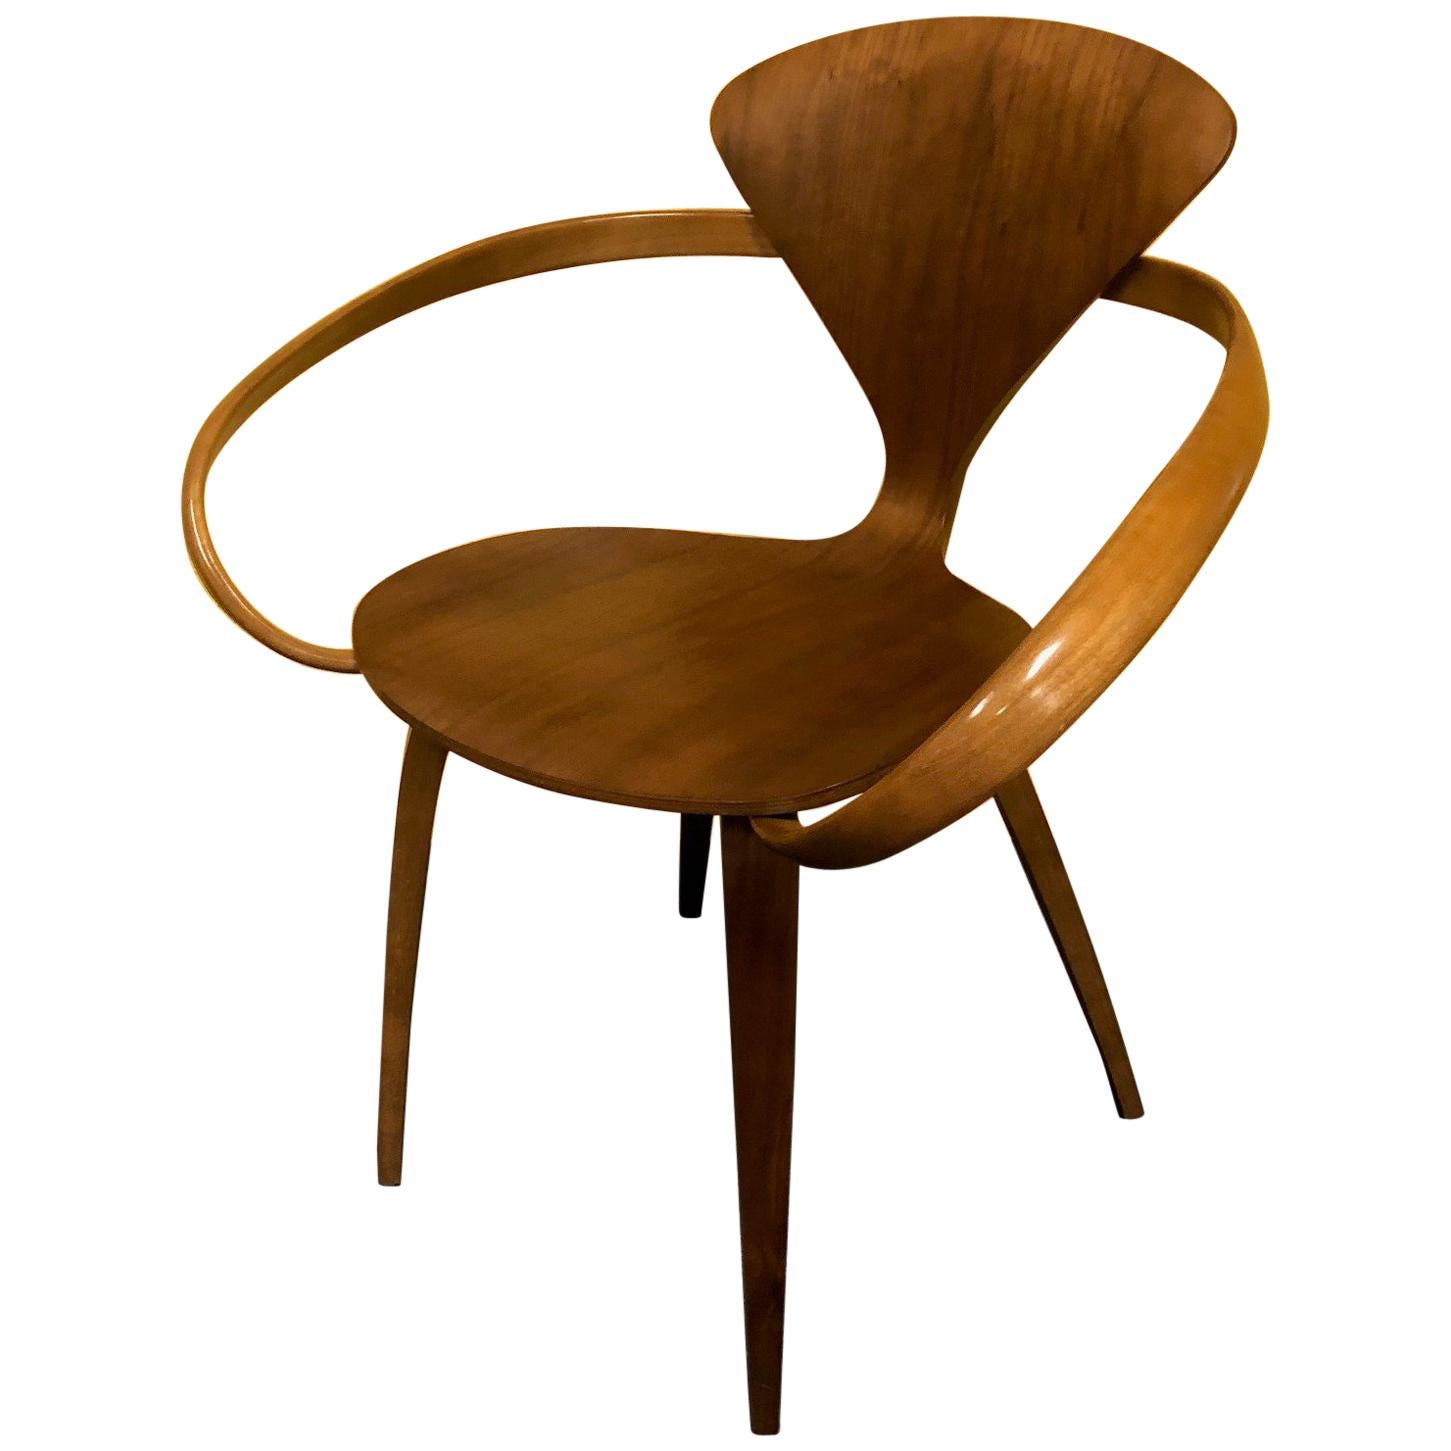 Walnut Molded Plywood Armchair / "Cherner Chair" by Norman Cherner